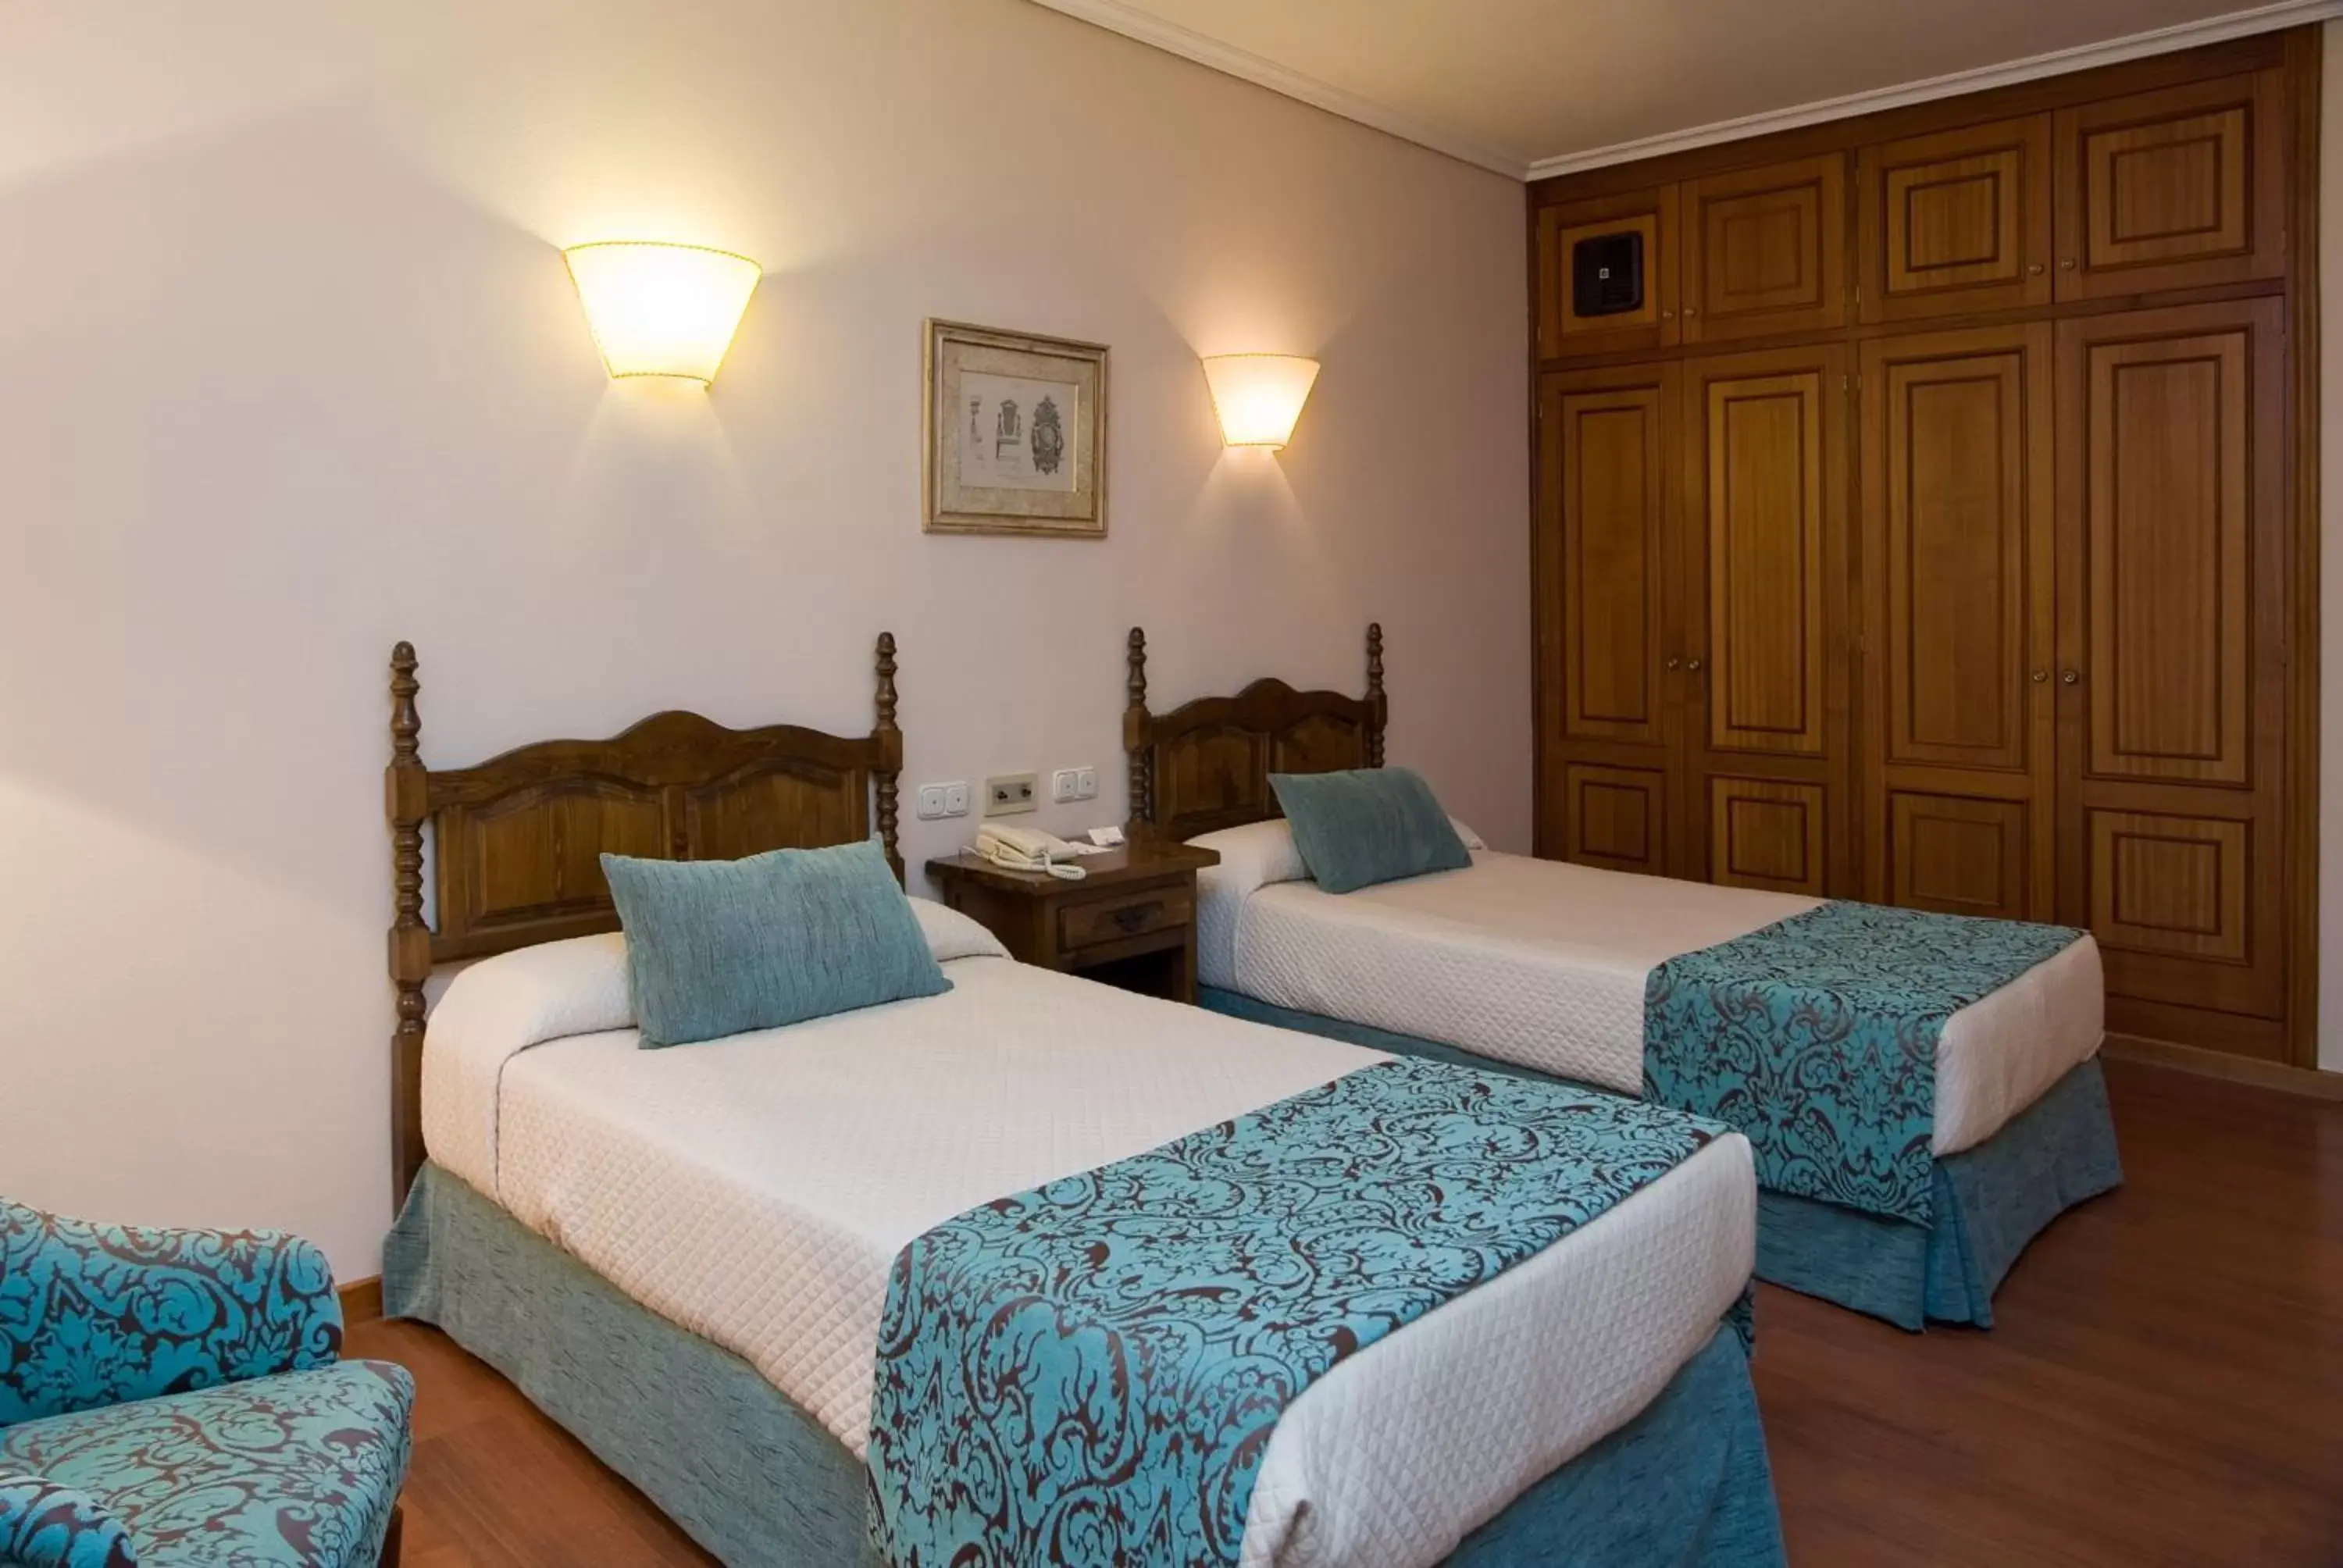 Bed, Room Photo in Hotel Pazo O Rial